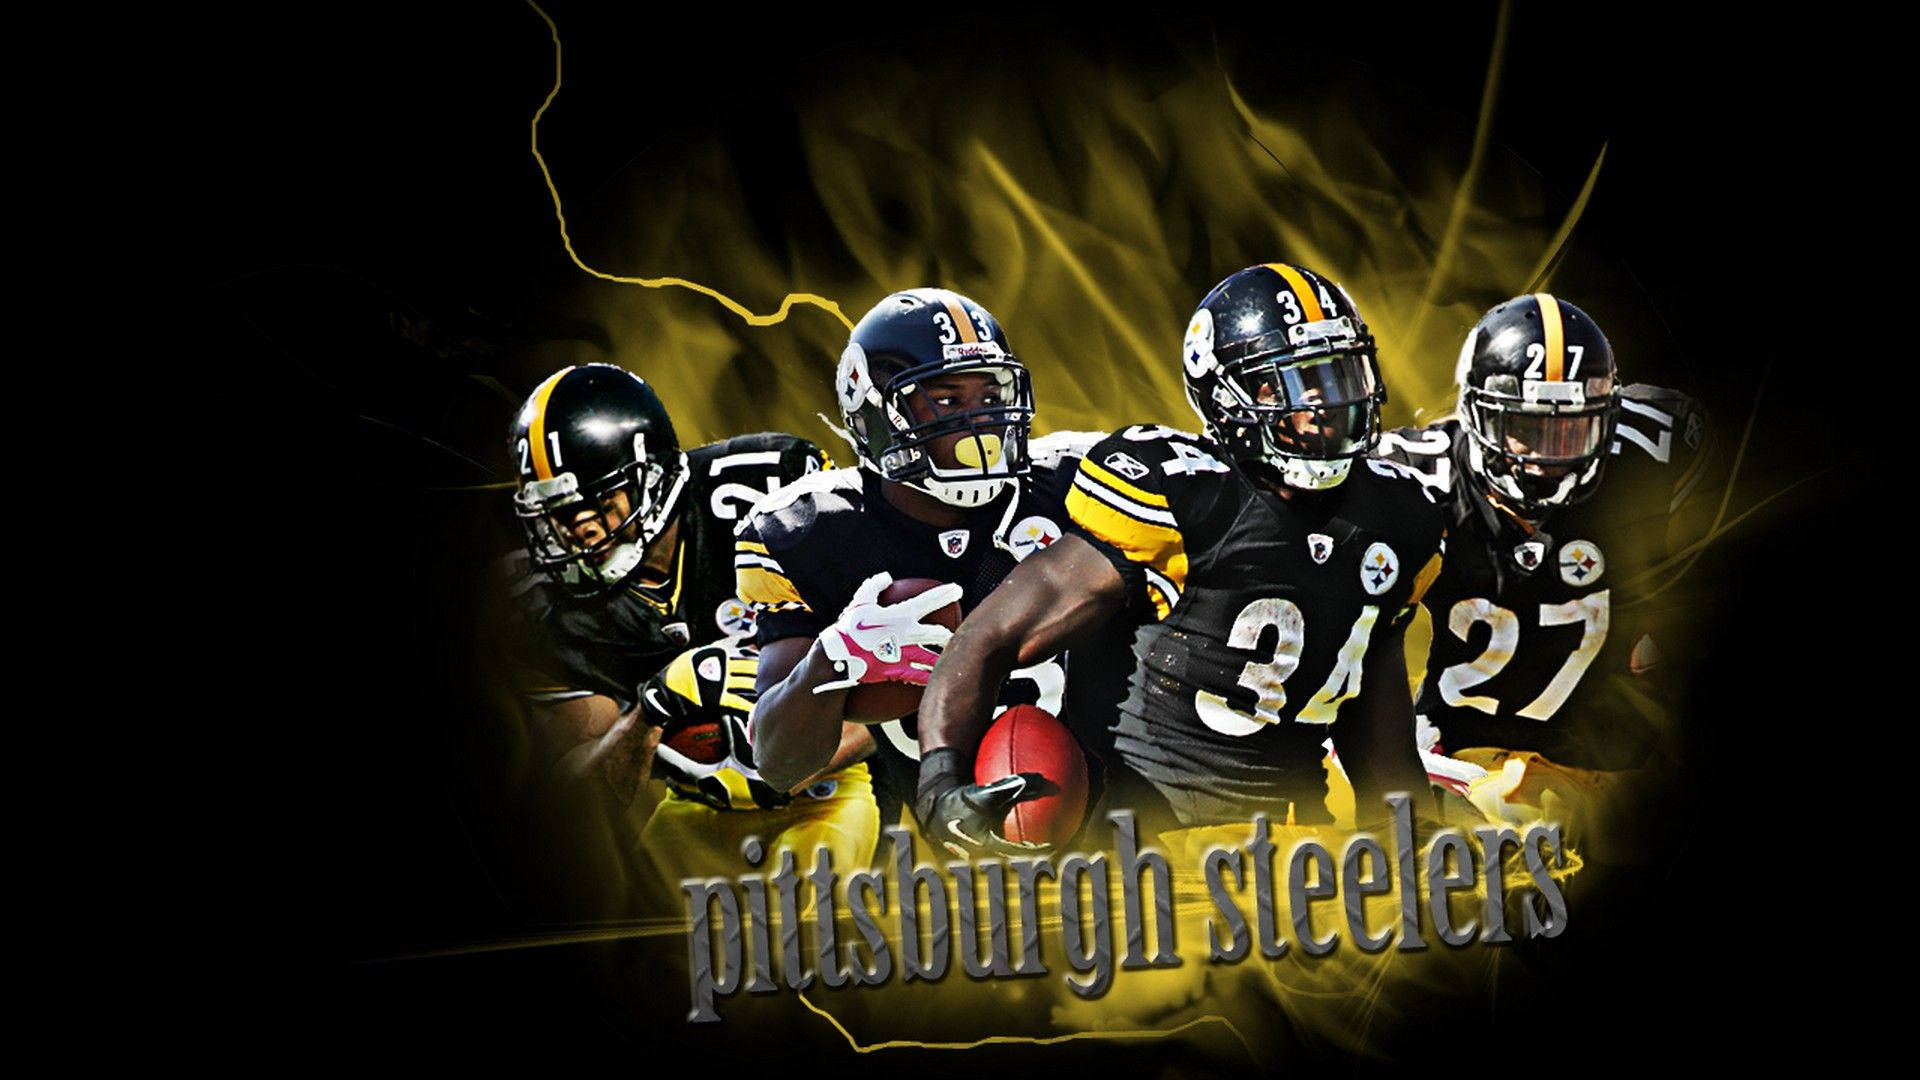 Cool Nfl Pittsburgh Steelers Background